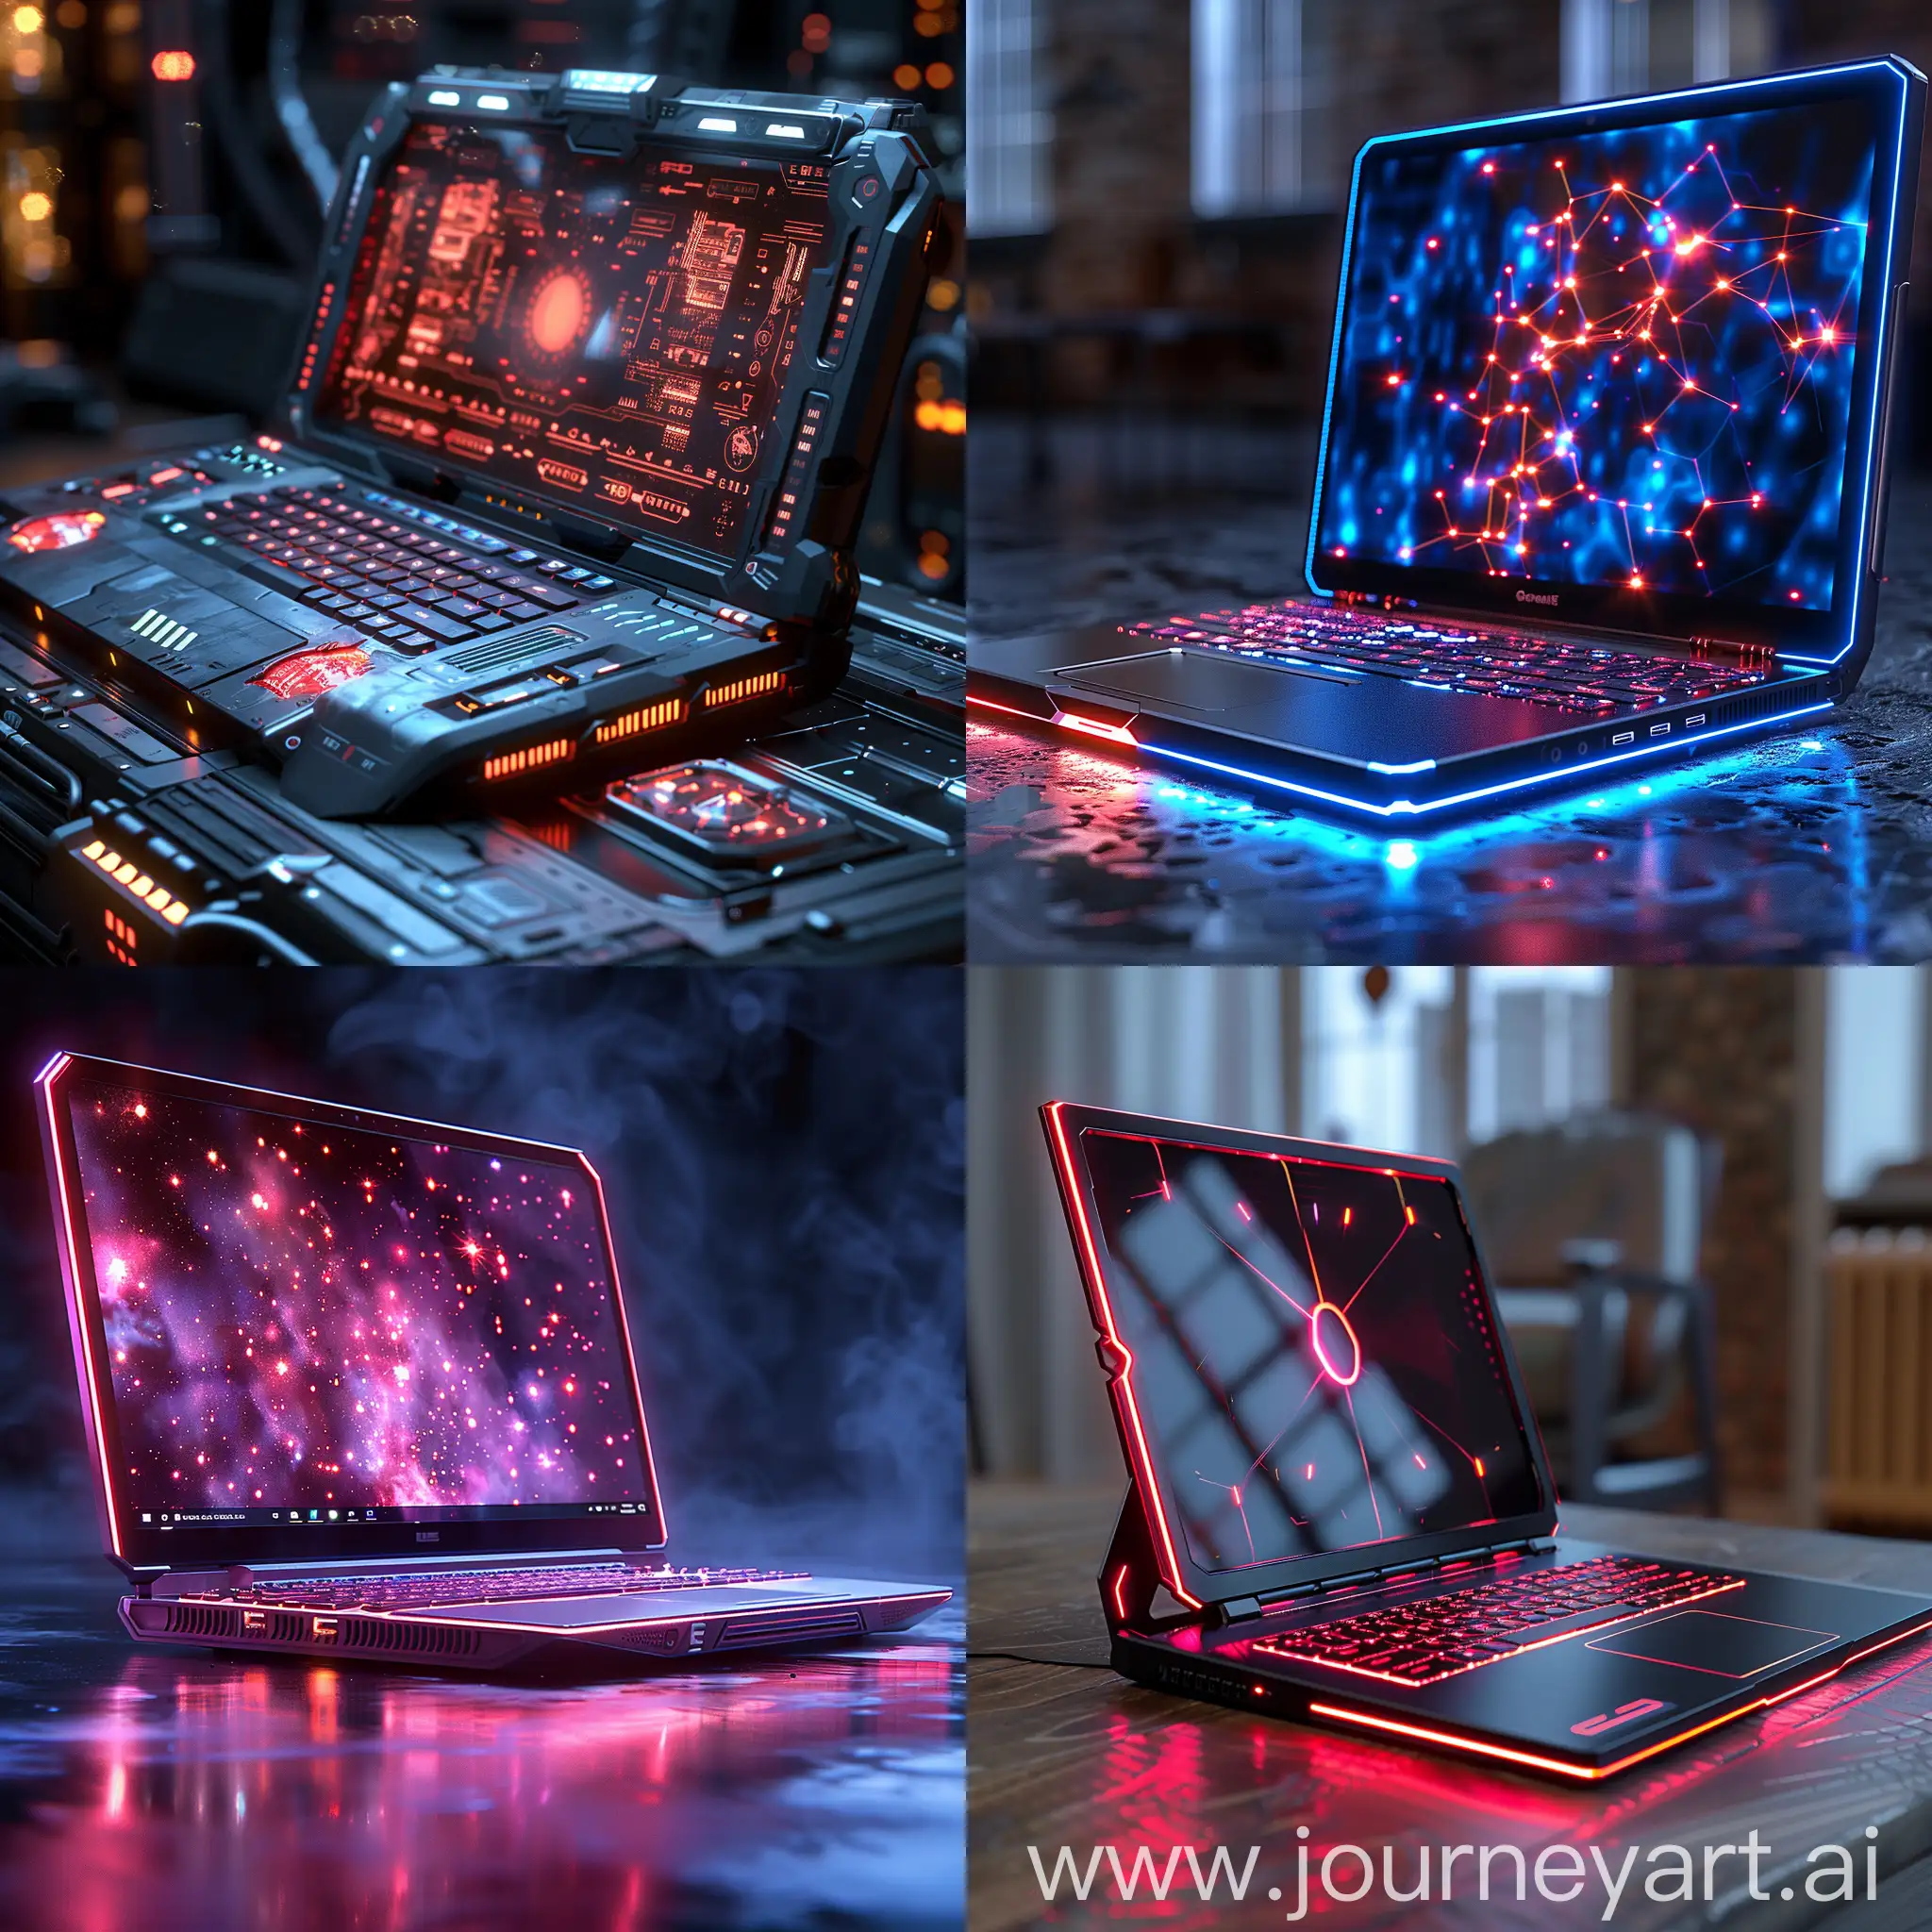 Futuristic-Laptop-with-ShapeShifting-Materials-and-Ultramodern-Design